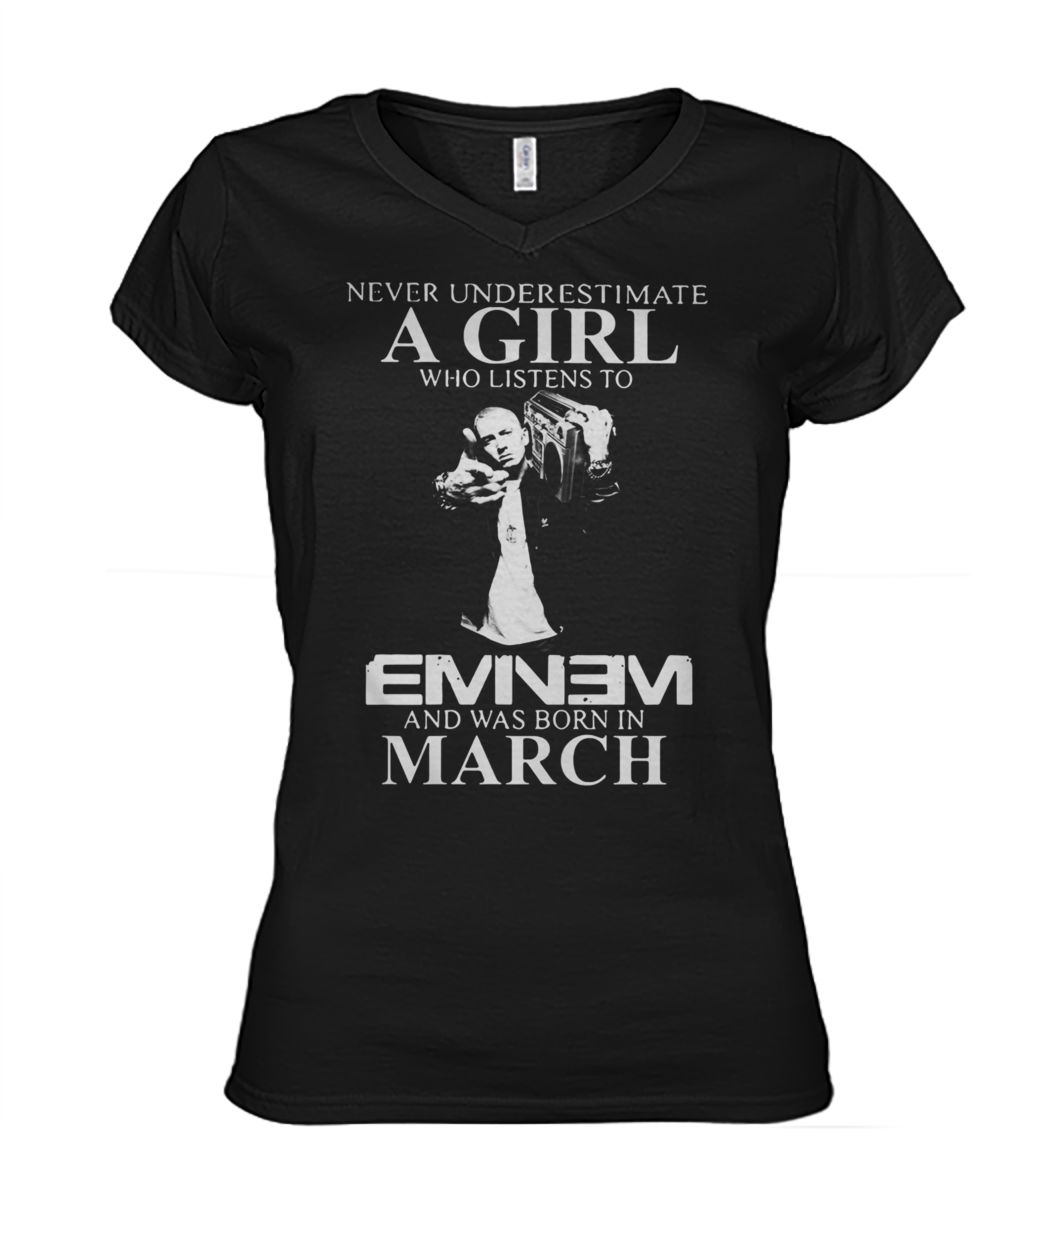 Never underestimate a girl who listens to eminem and was born in march women's v-neck